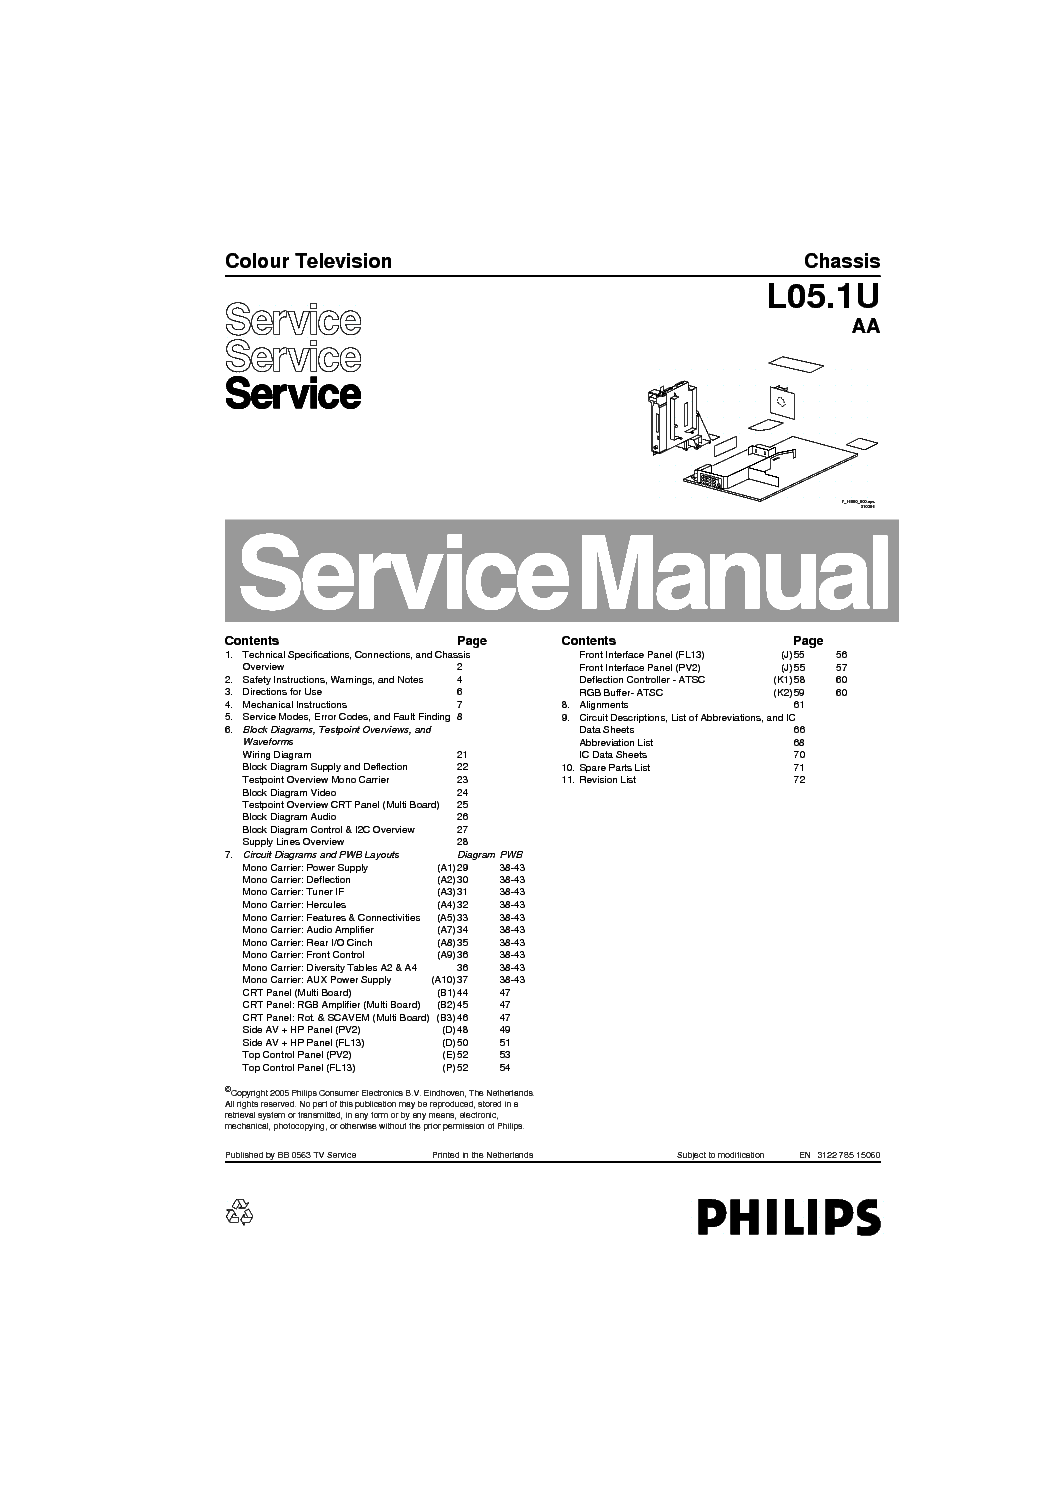 PHILIPS CHASSIS L05.1U-AA service manual (1st page)